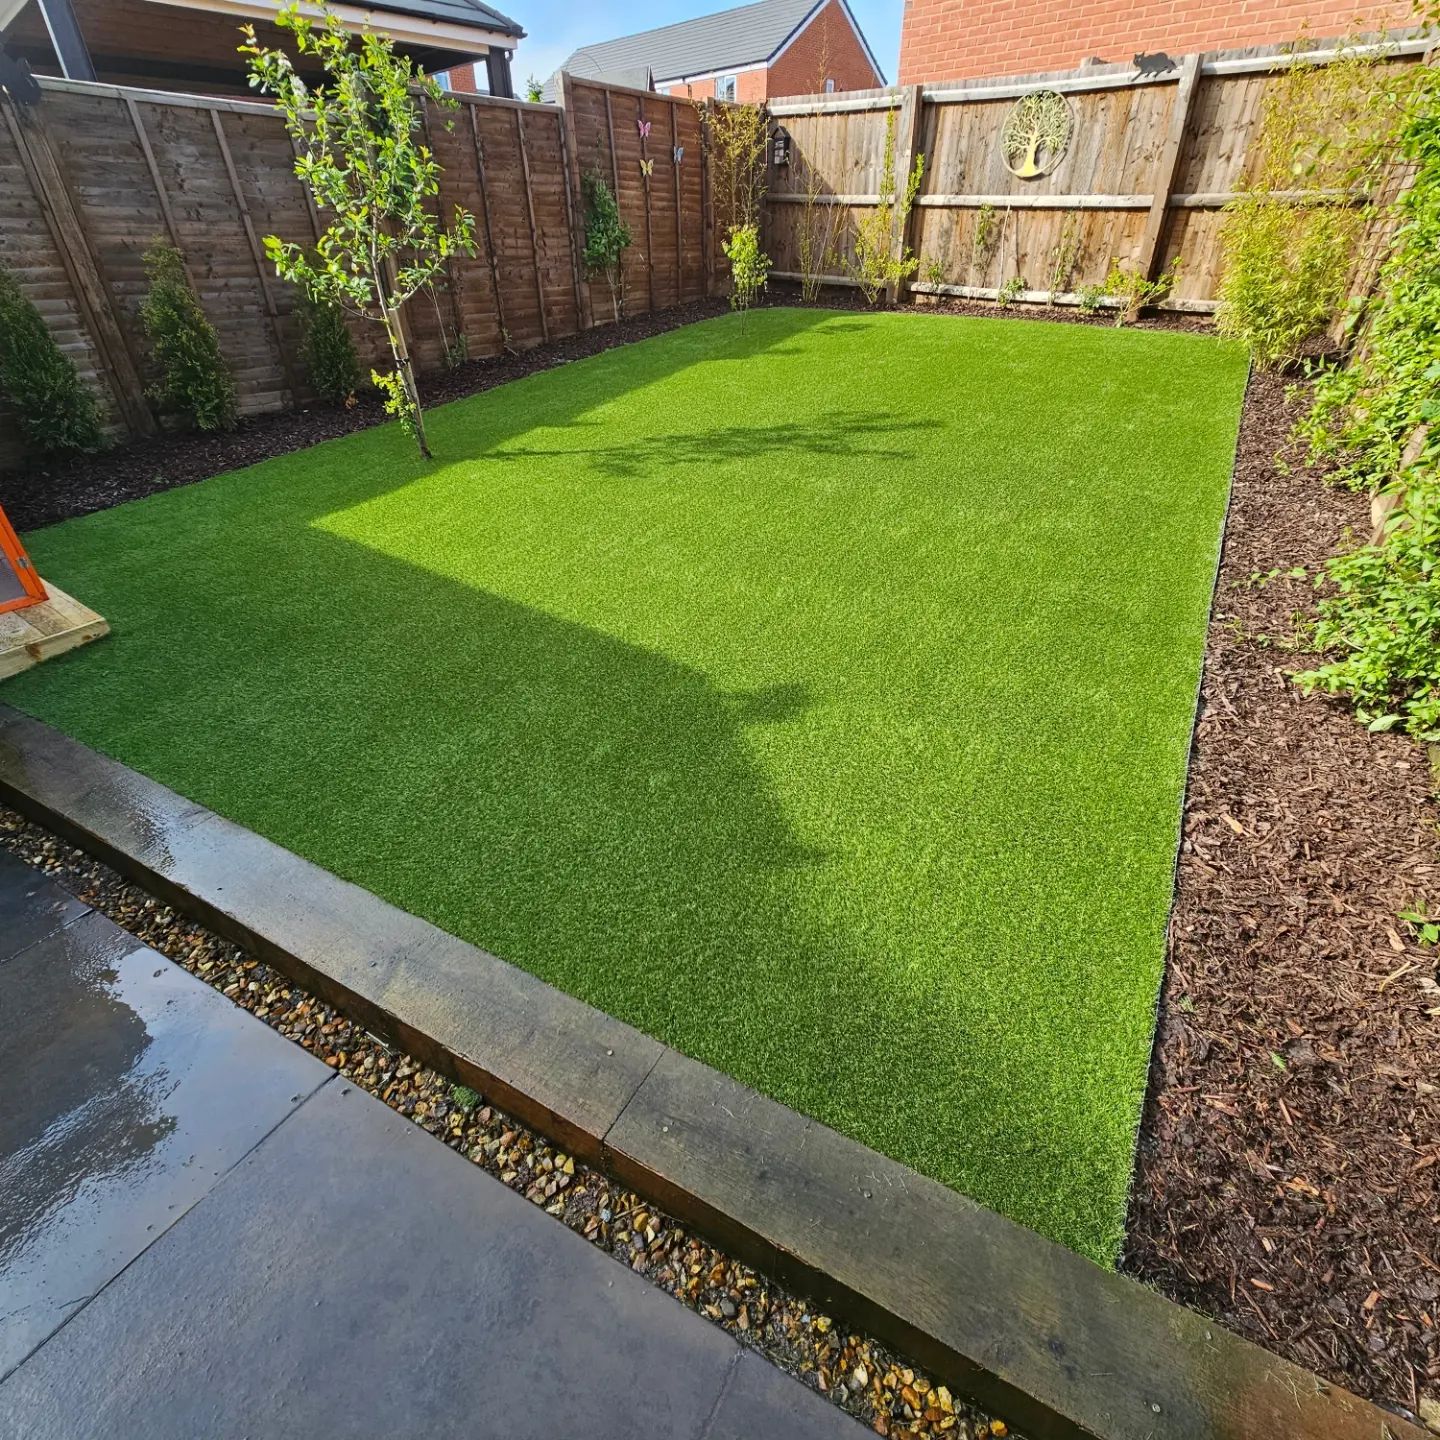 The Ultimate Guide to Care for Your Artificial Grass